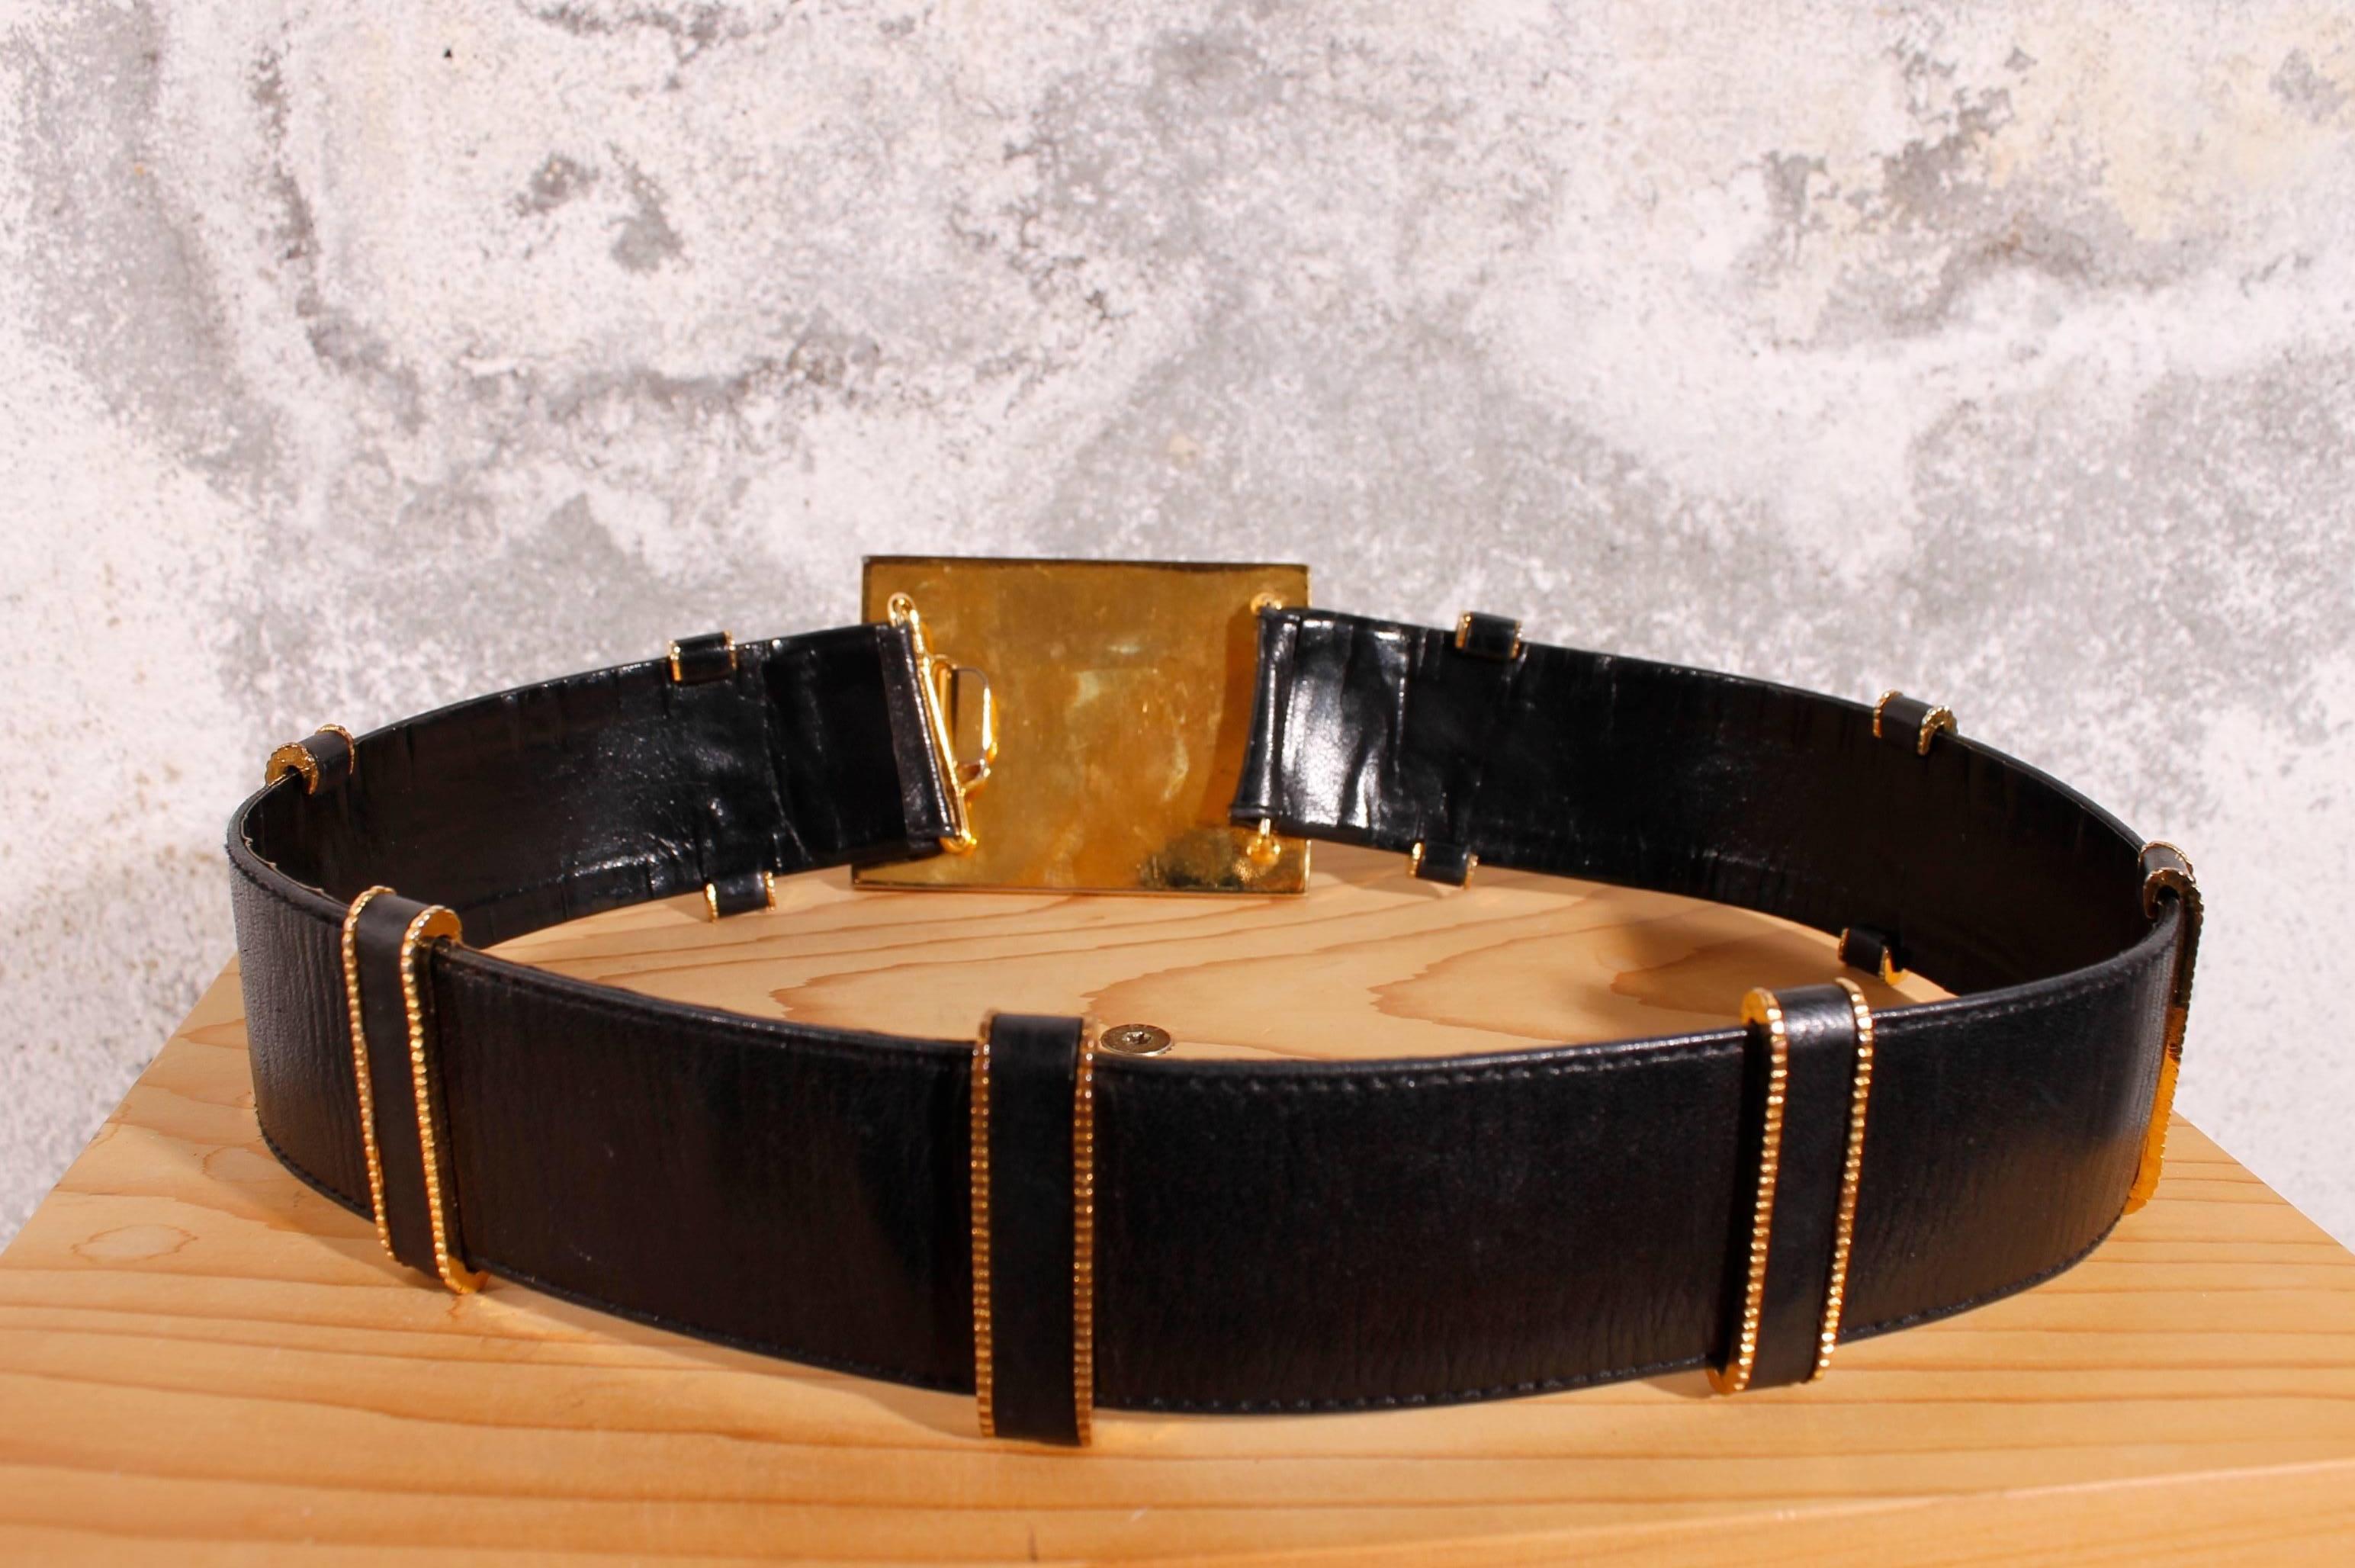 Vintage Chanel belt from the eighties! How cool is this one?!

The large buckle on the front is made of goldtone metal with black leather details. The golden metal 'frames' the large CC-logo in the middle.
At the back of the buckle is a little